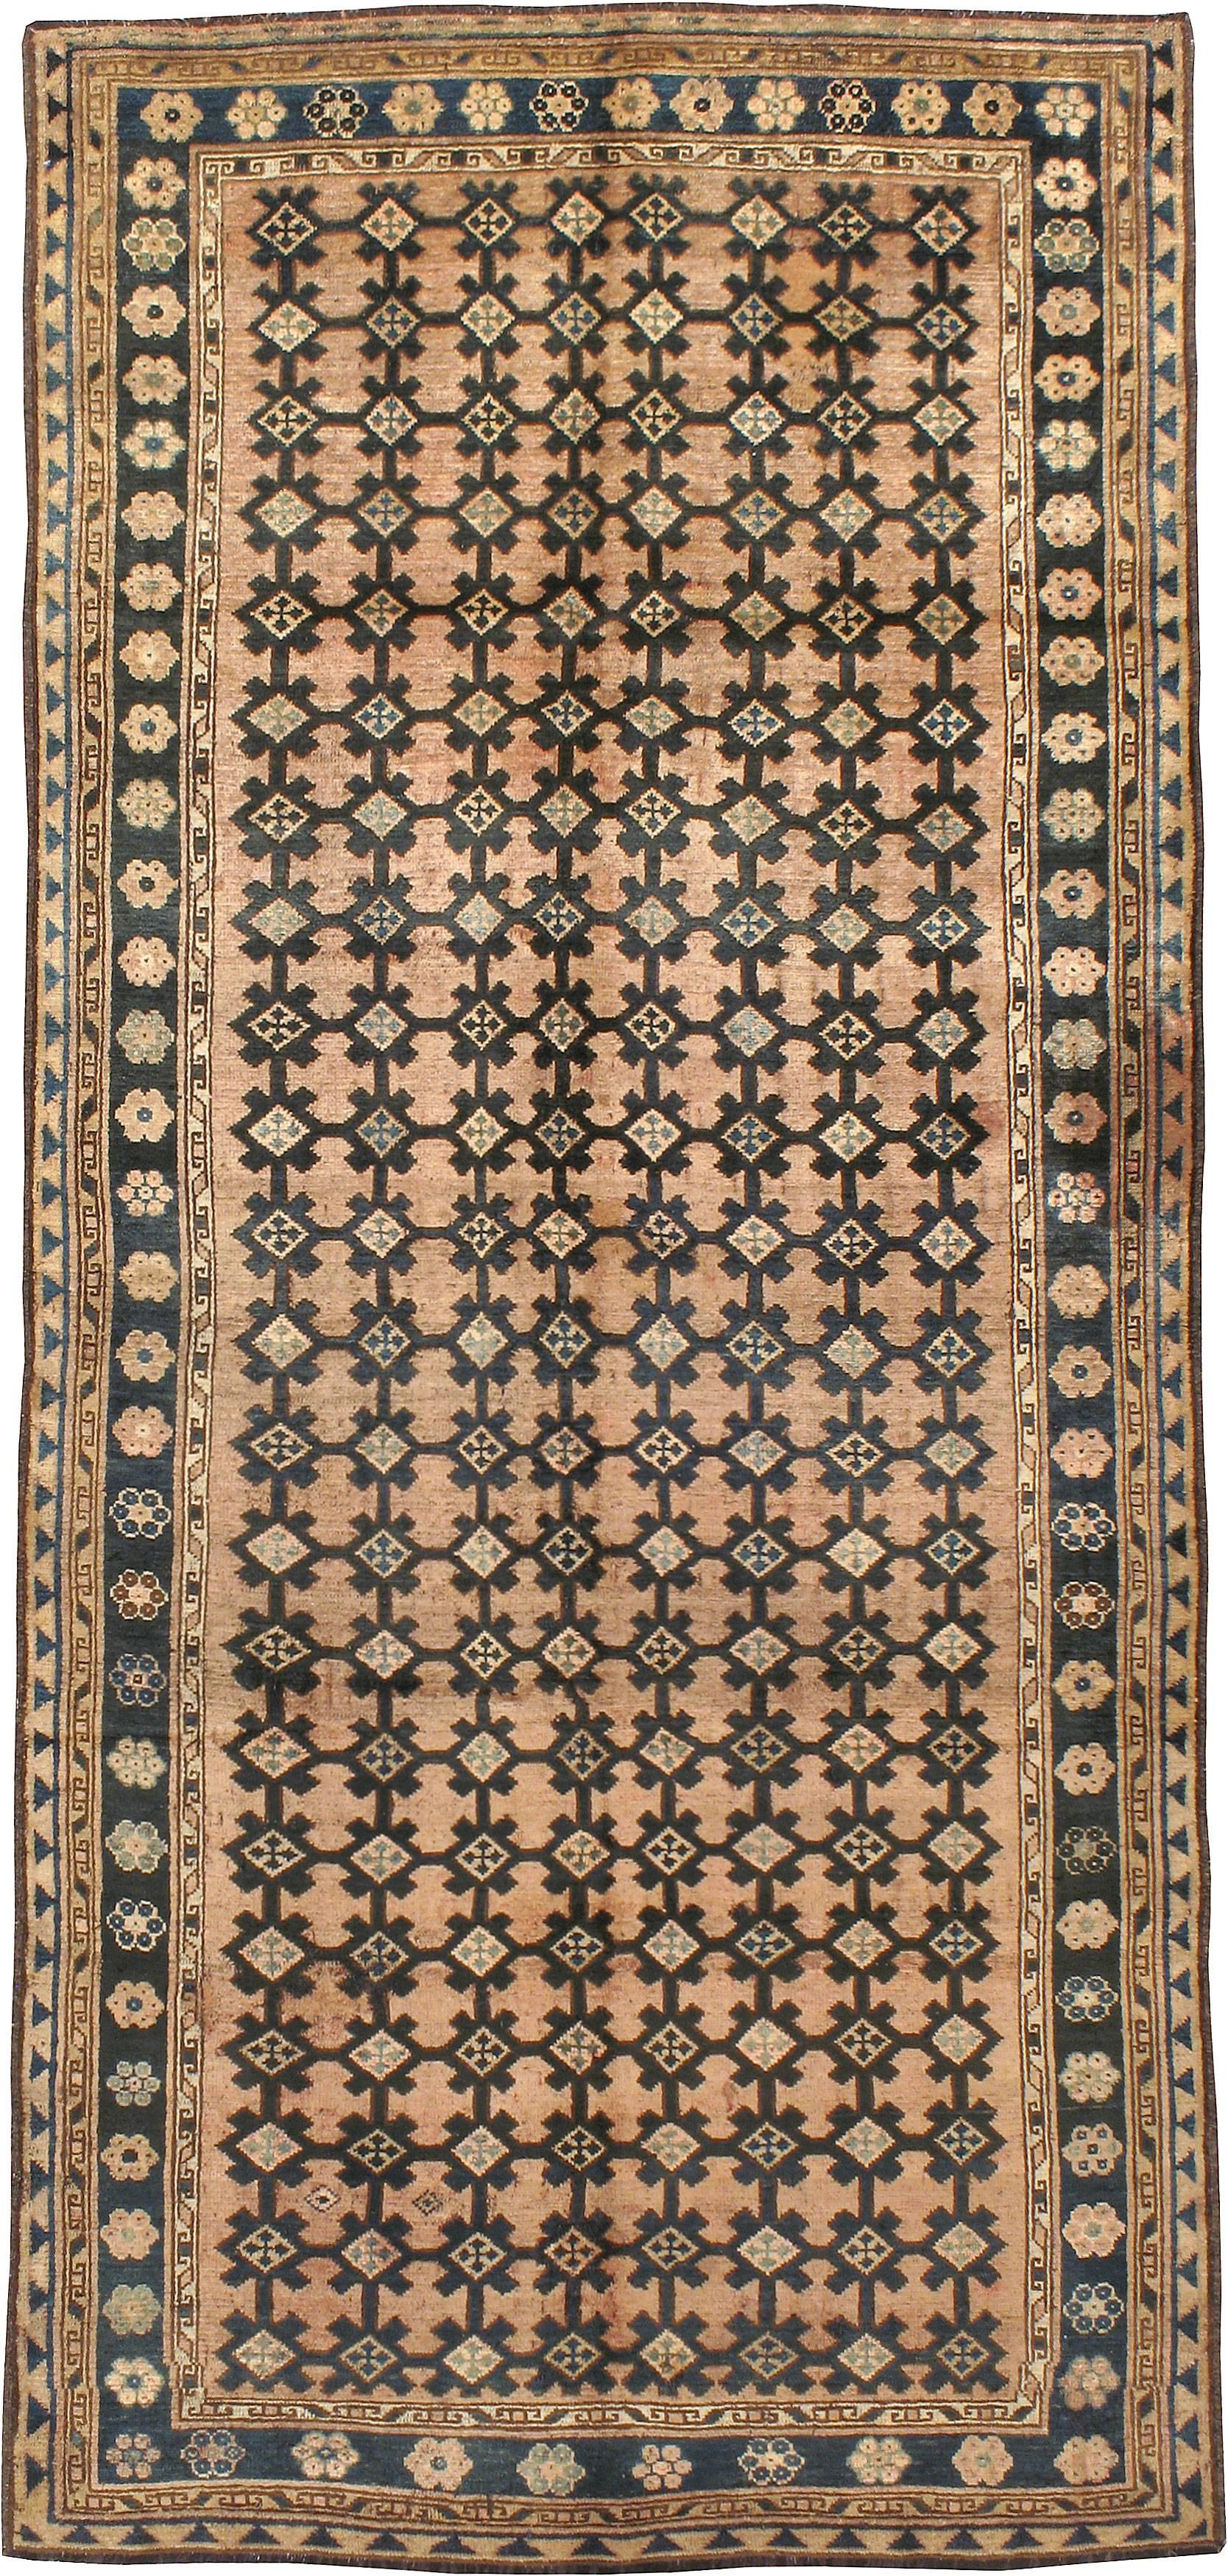 An antique East Turkestan Kirghiz carpet from the first quarter of the 20th century.